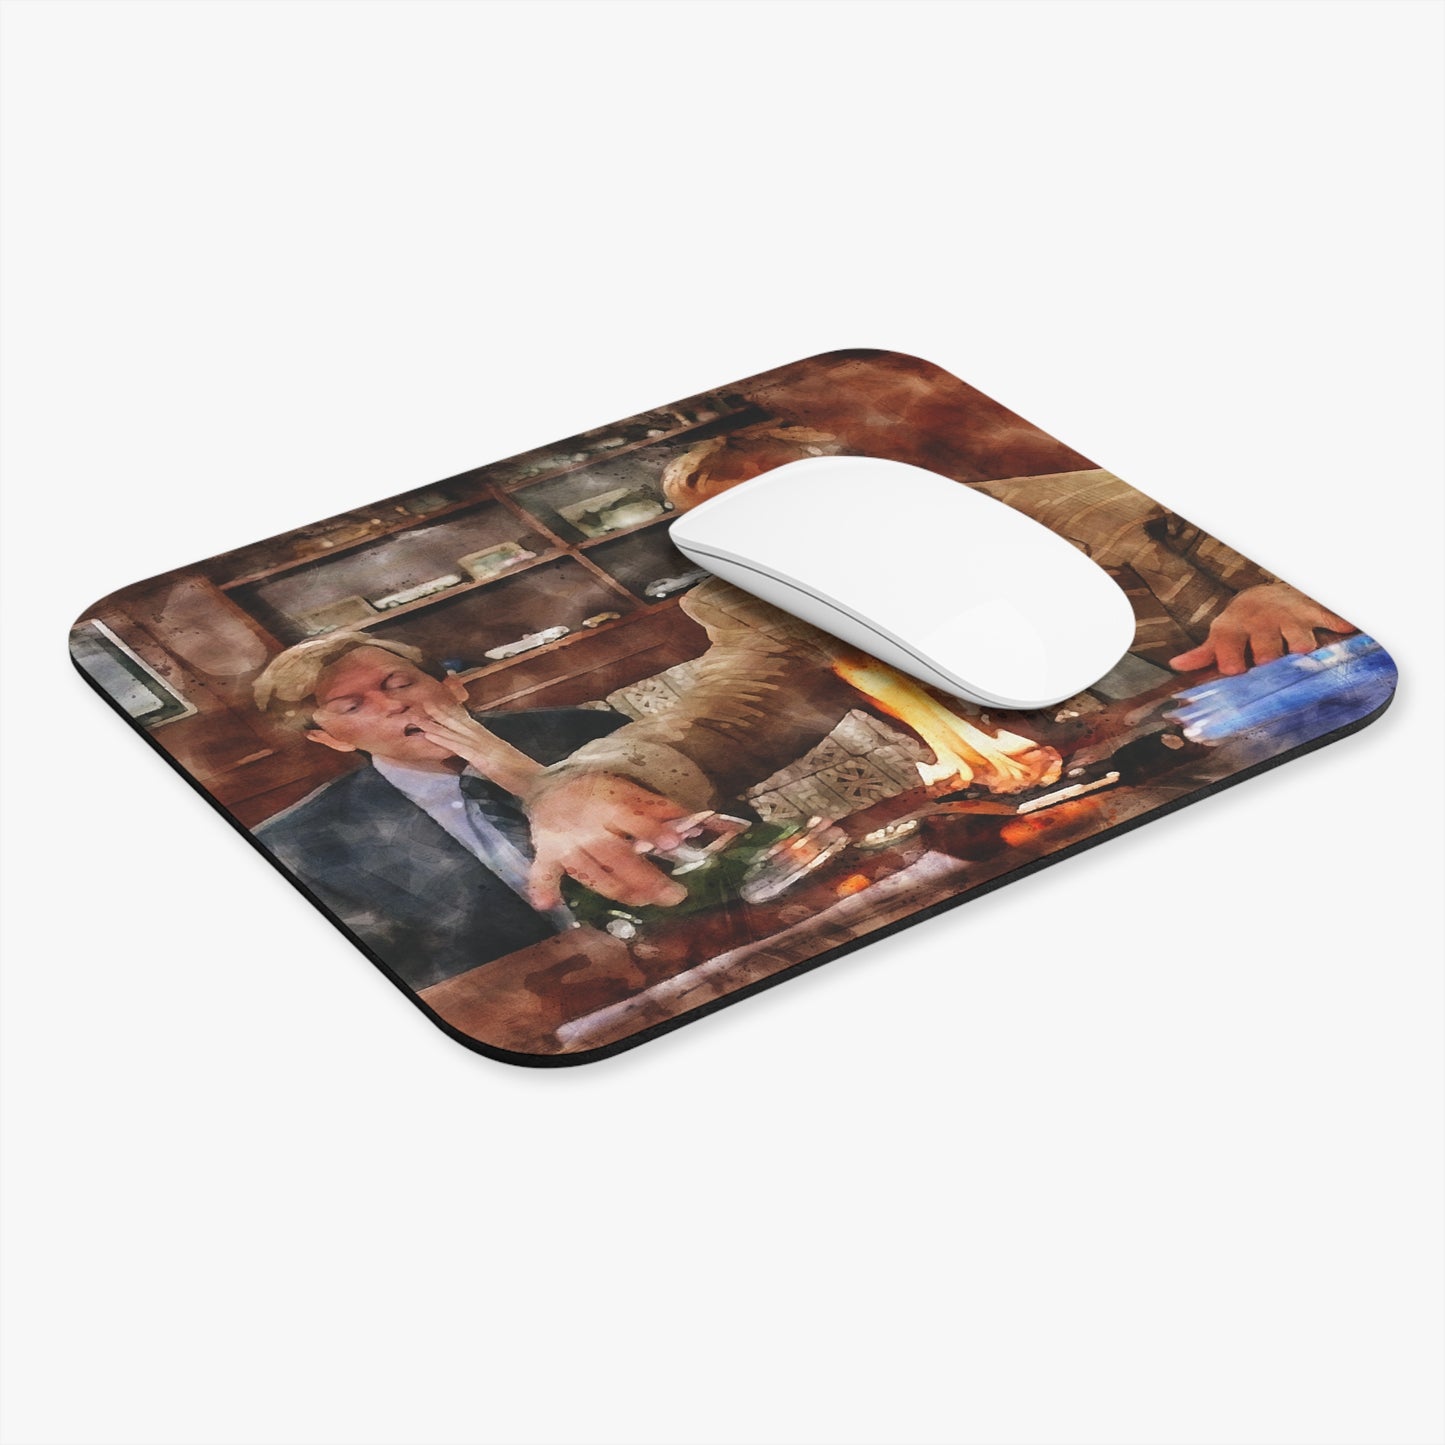 Tommy Boy Inspired "The Sales Pitch" Mouse Pad - 9x8